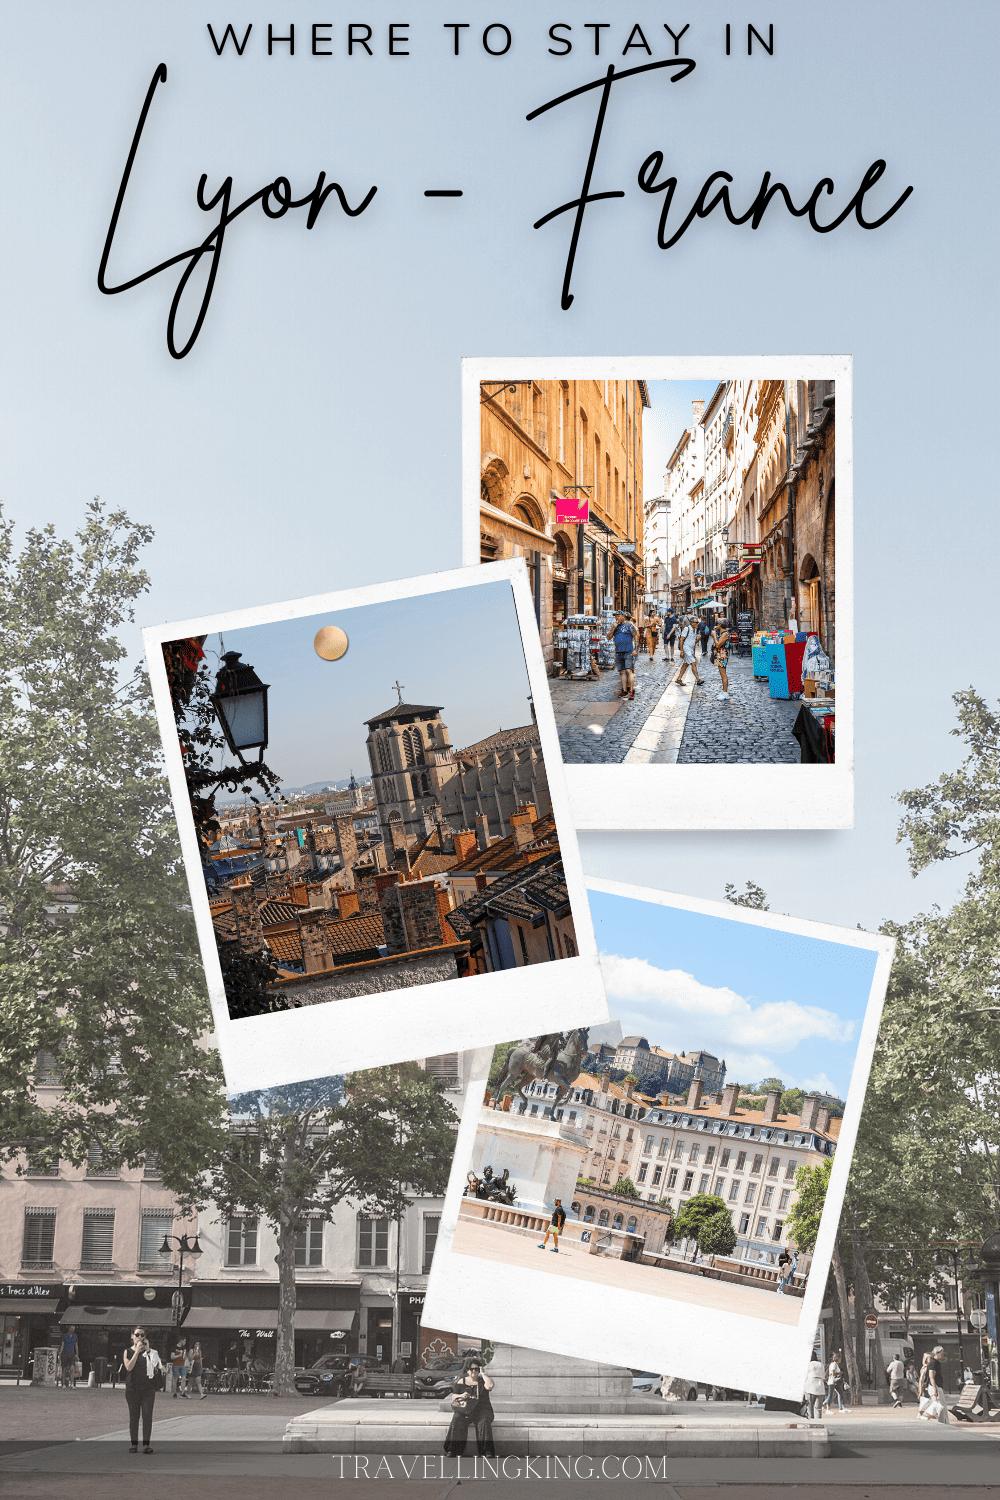 Where to stay in Lyon